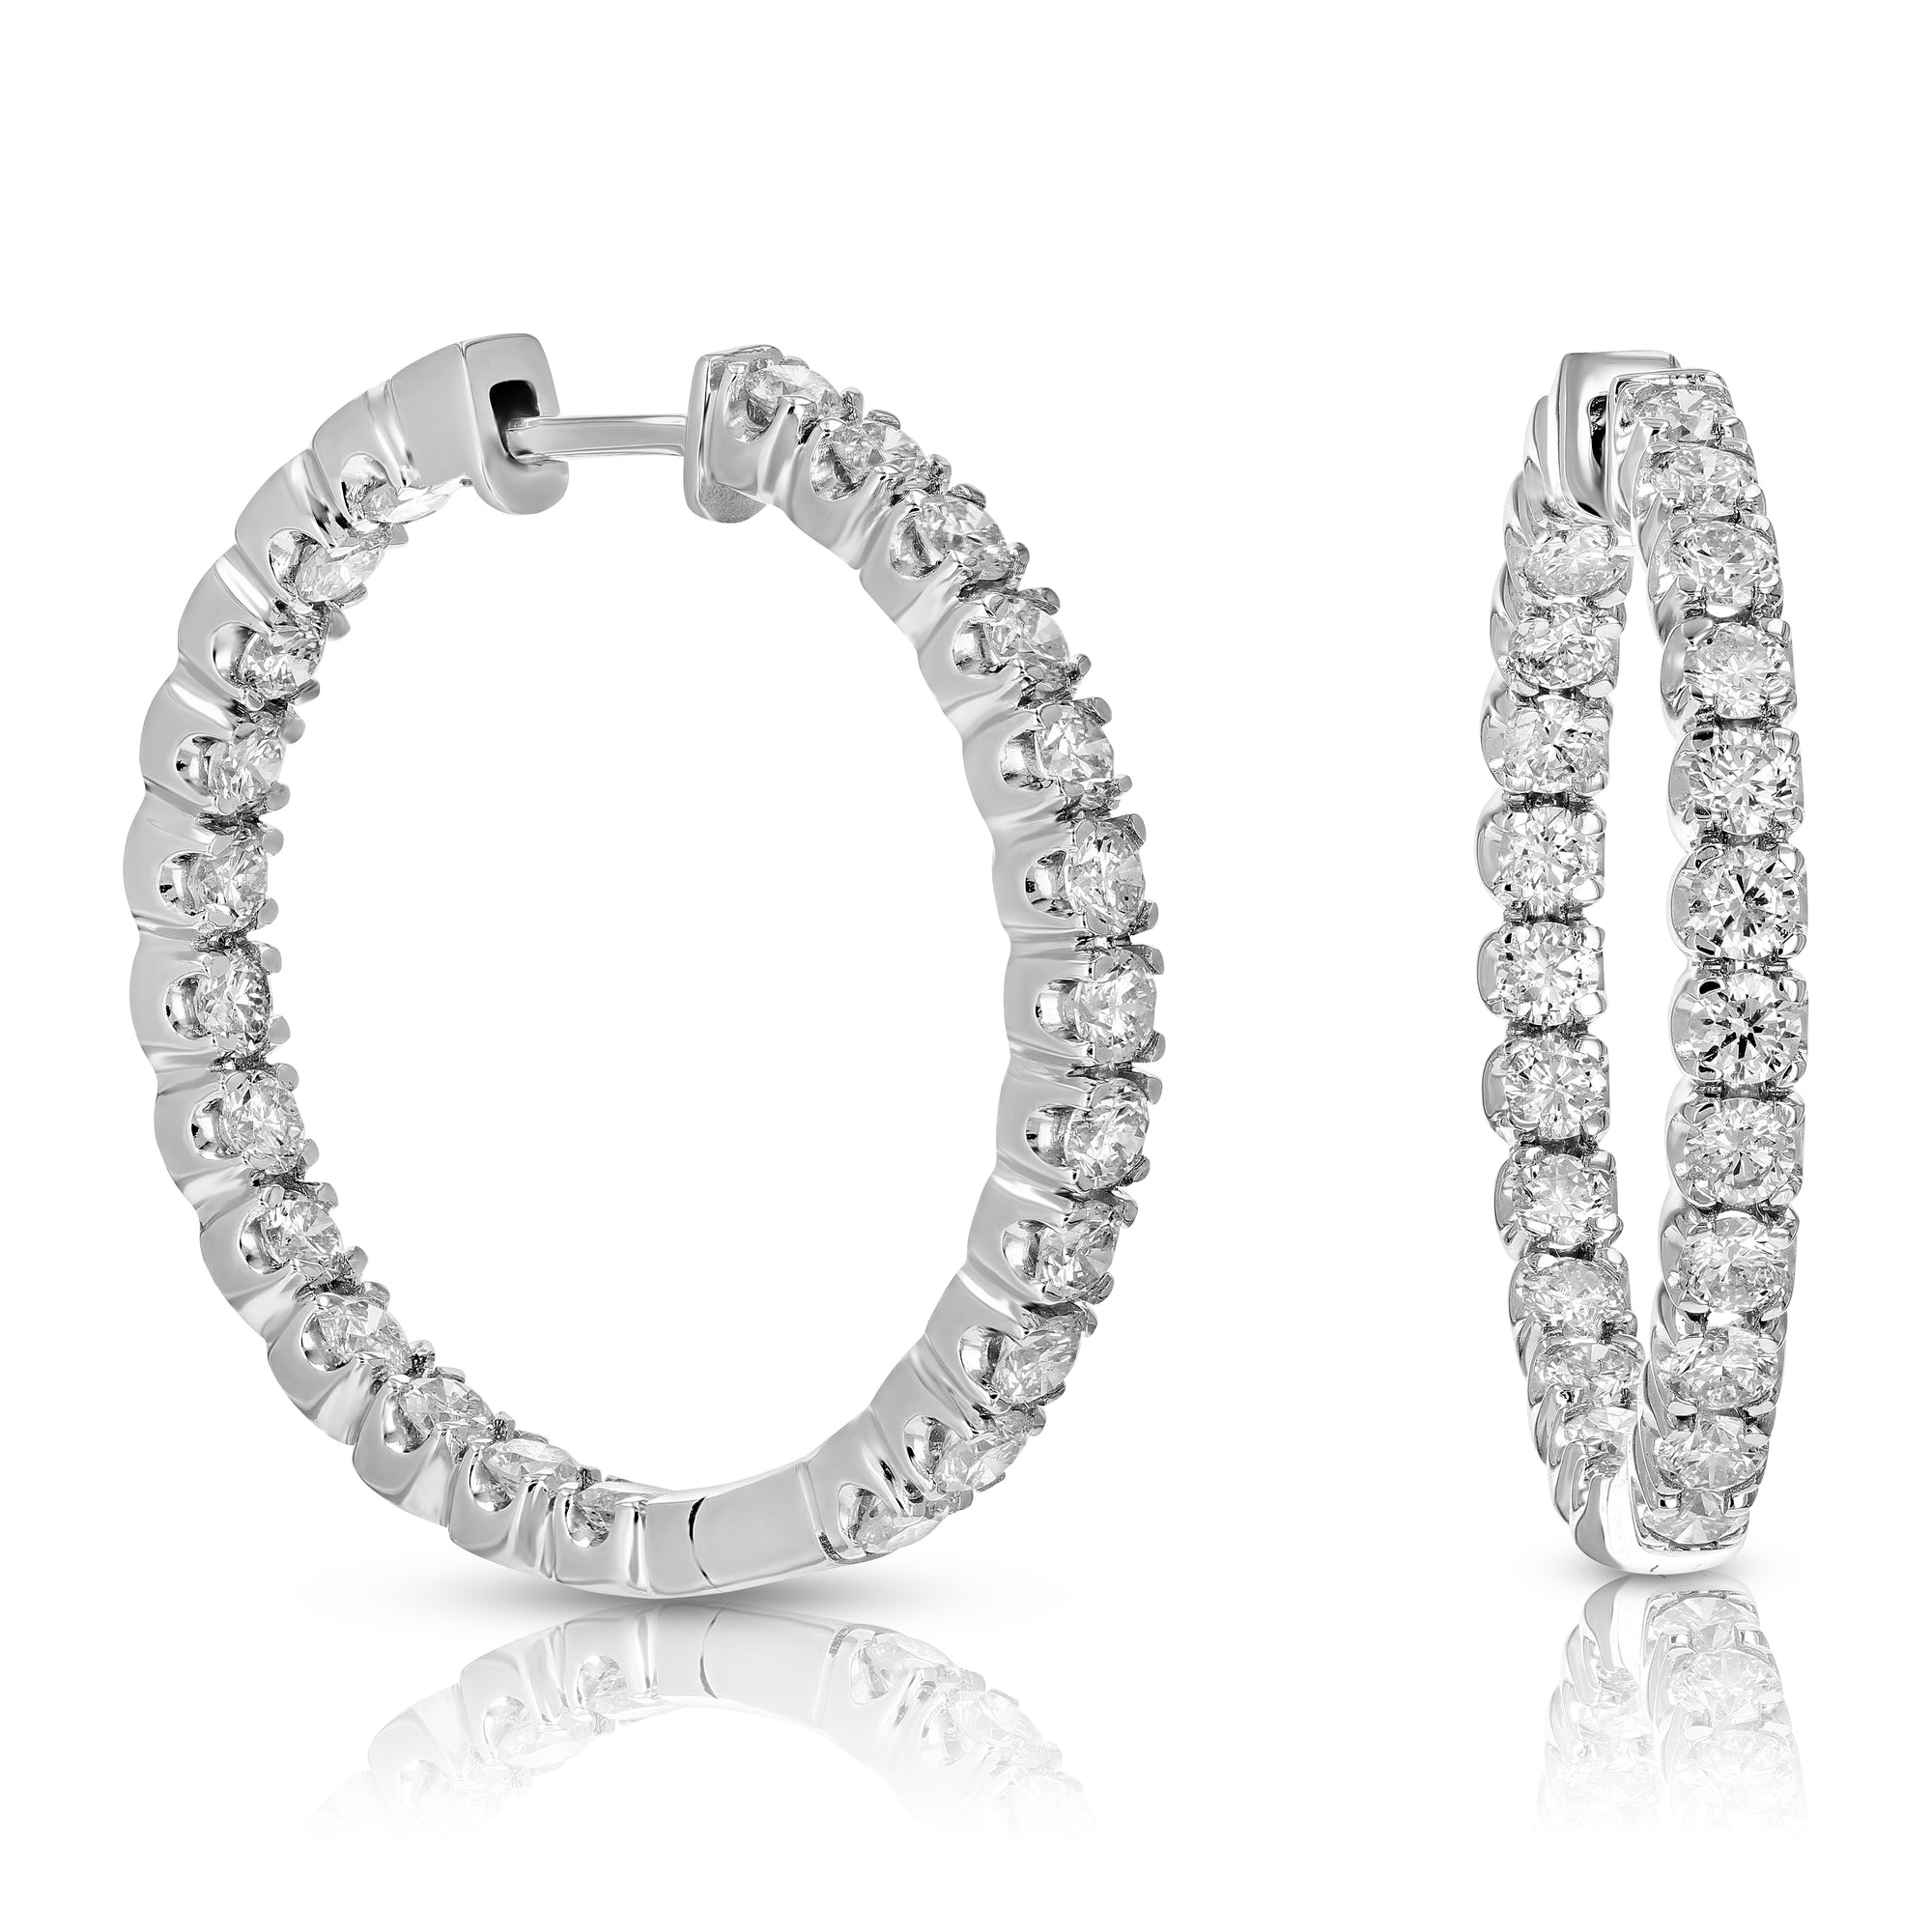 4 cttw Diamond Hoop Earrings 14K White Gold Round Prong Set Inside Out 1.30 inch